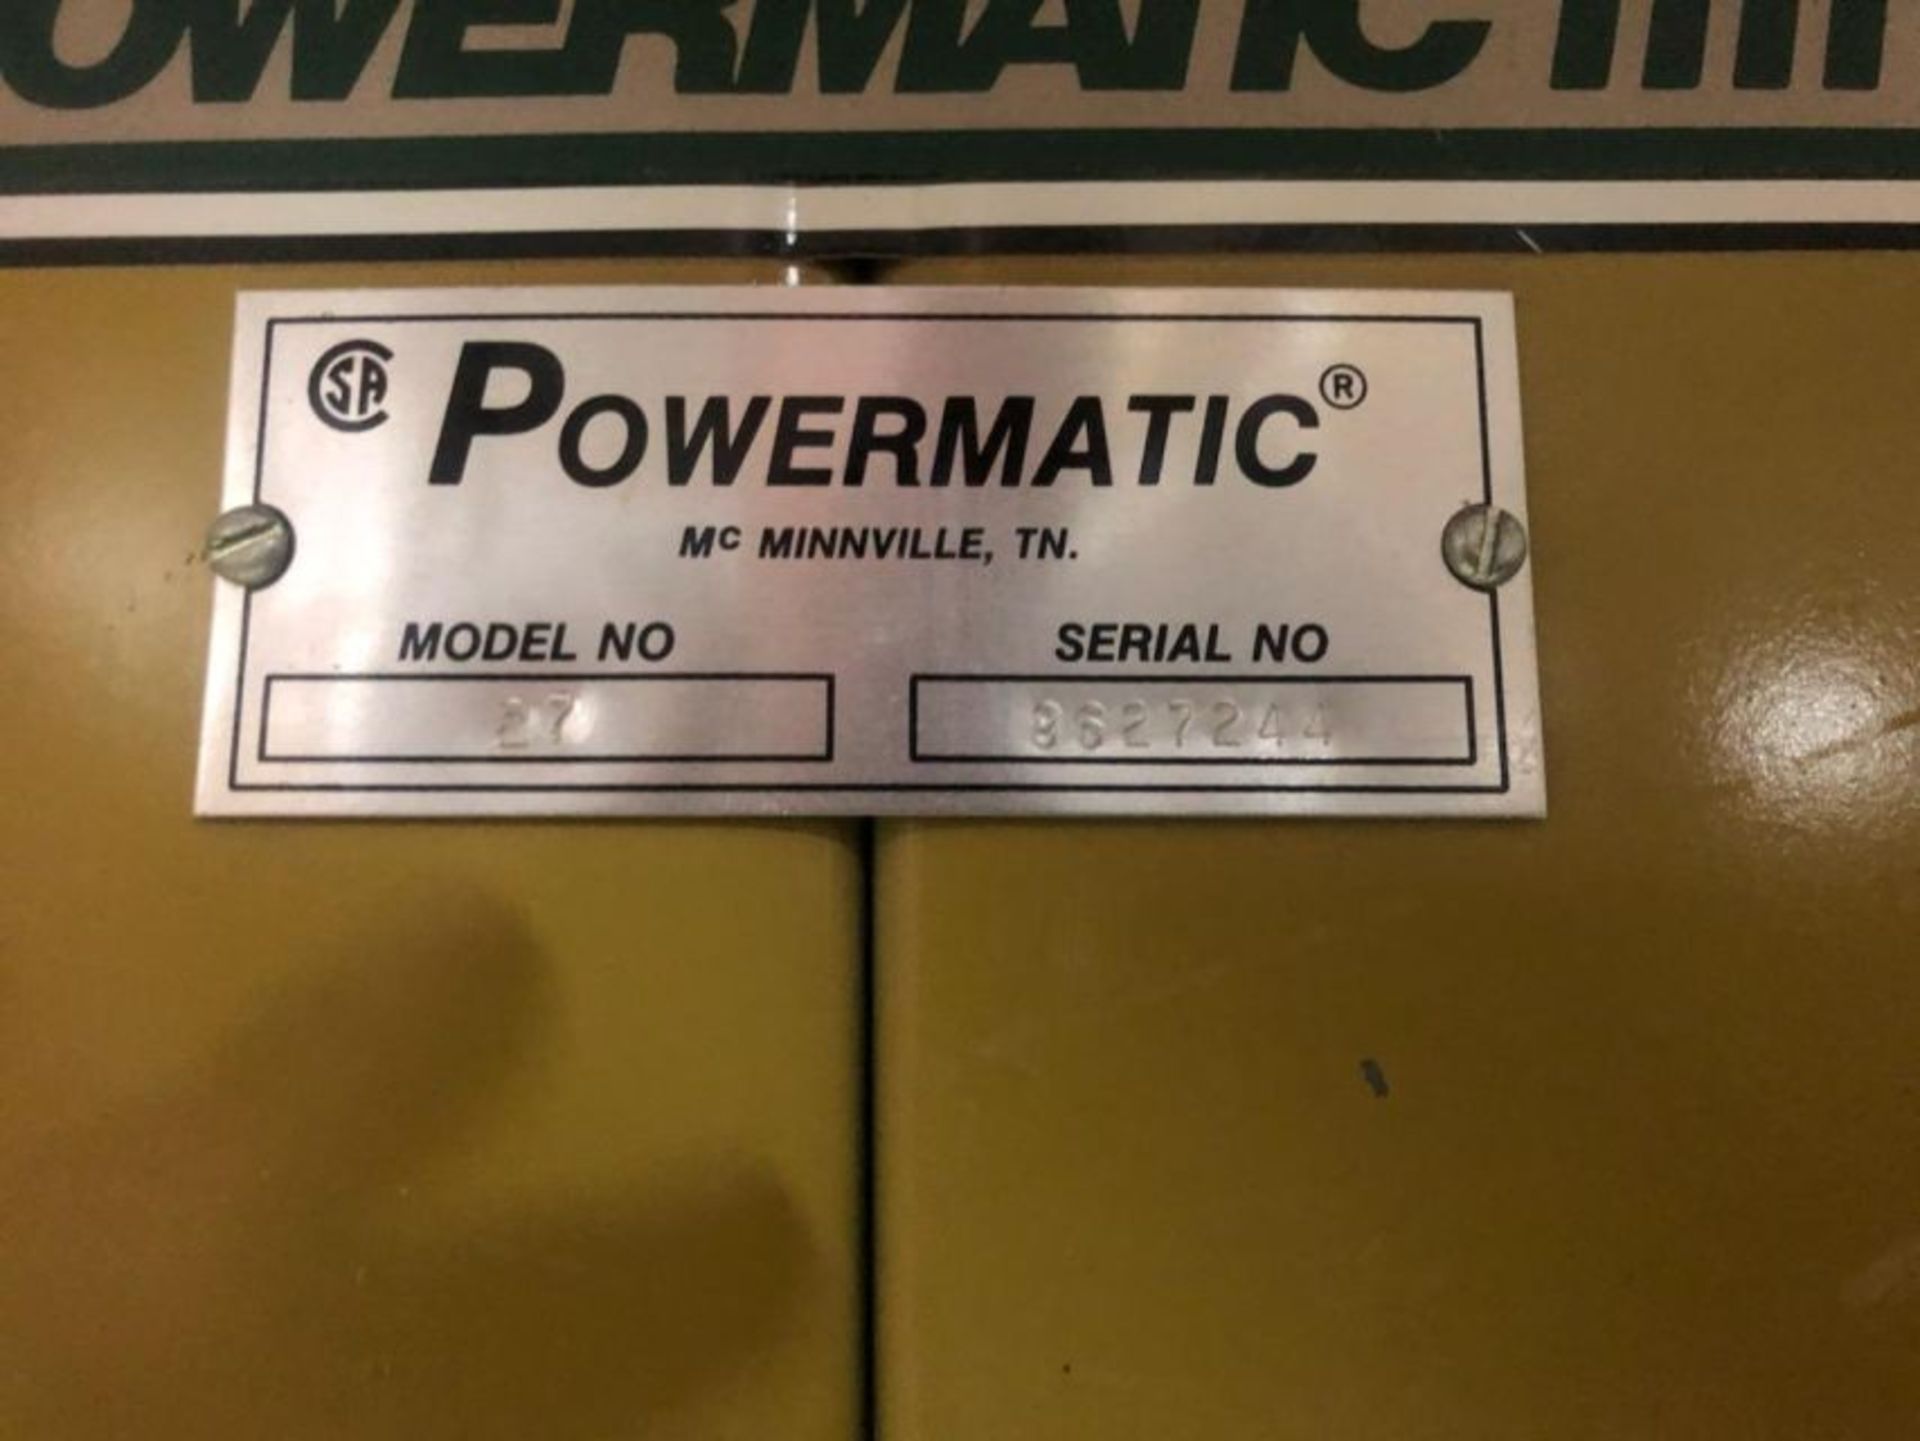 powermatic model 27 floor model commercial shaper, 3 phase. This item is located @ 423 N Spencer - Image 2 of 2